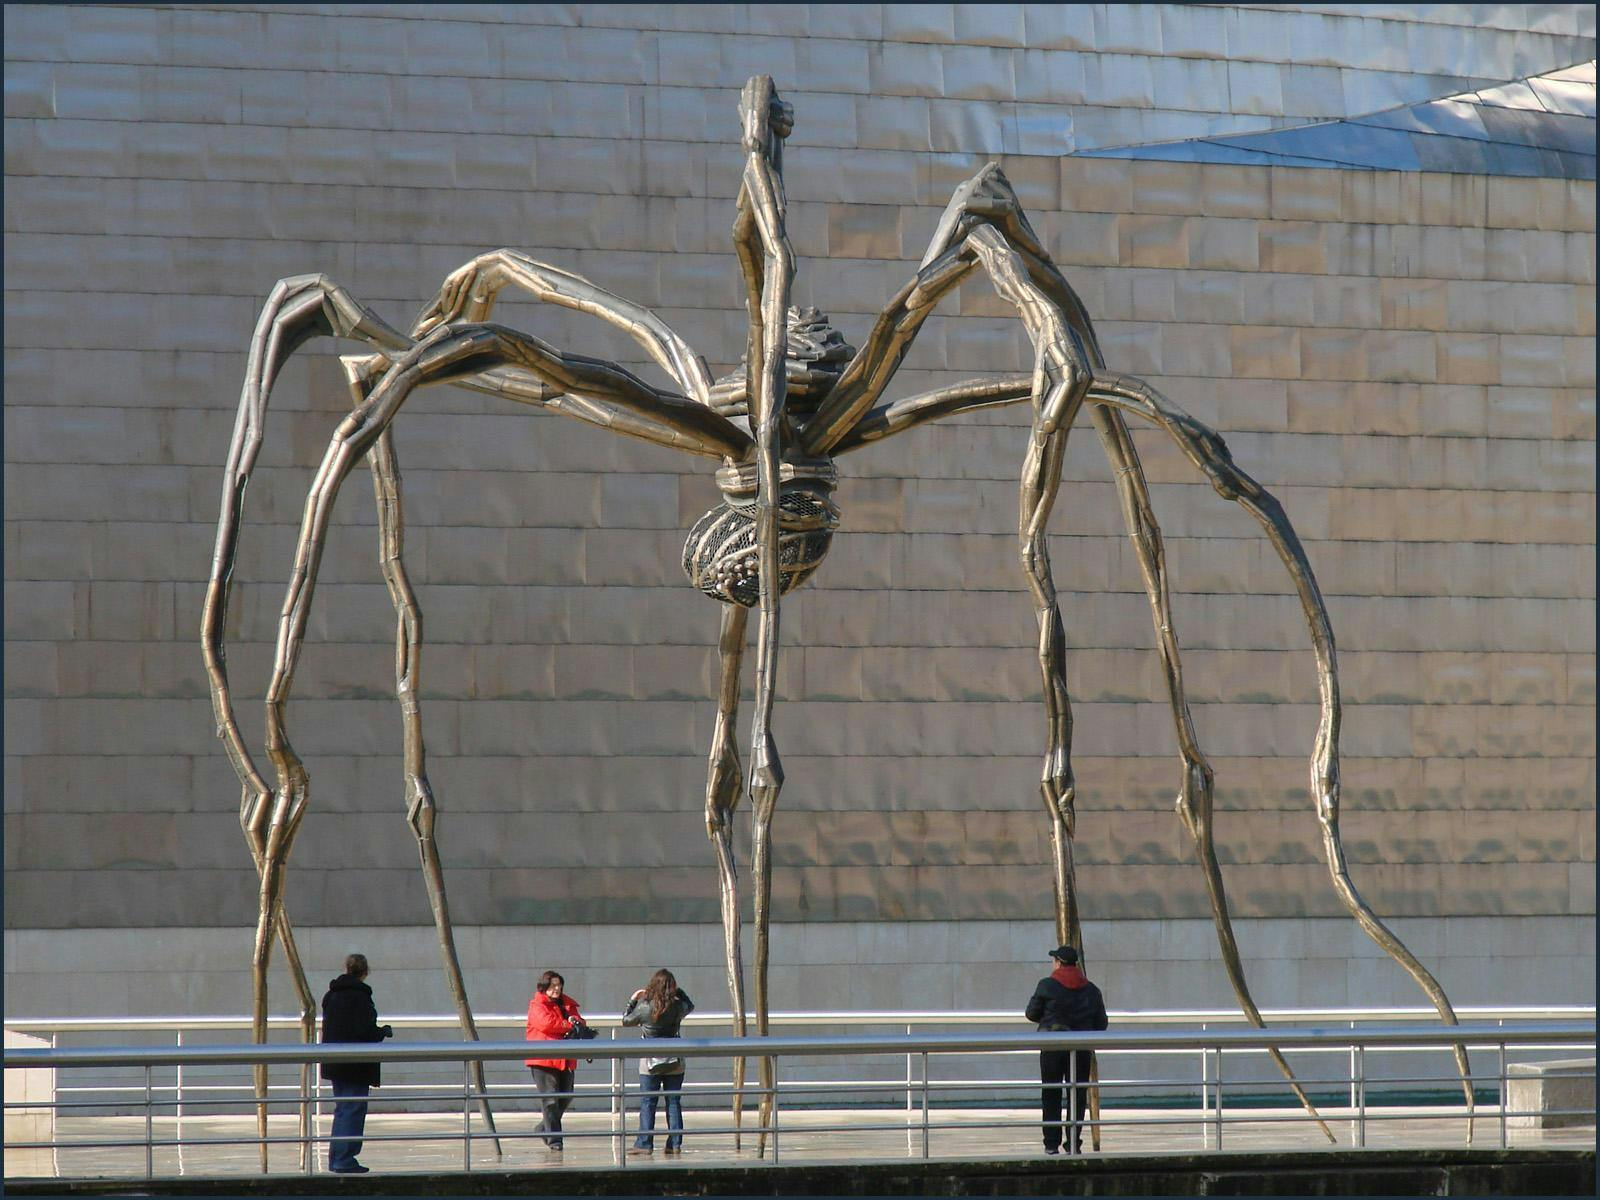 Louise Bourgeois, detail view of Maman, 1999, cast 2001. Bronze, marble, and stainless steel. 29 feet 4 3/8 in x 32 feet 1 7/8 in x 38 feet 5/8 in (895 x 980 x 1160 cm).